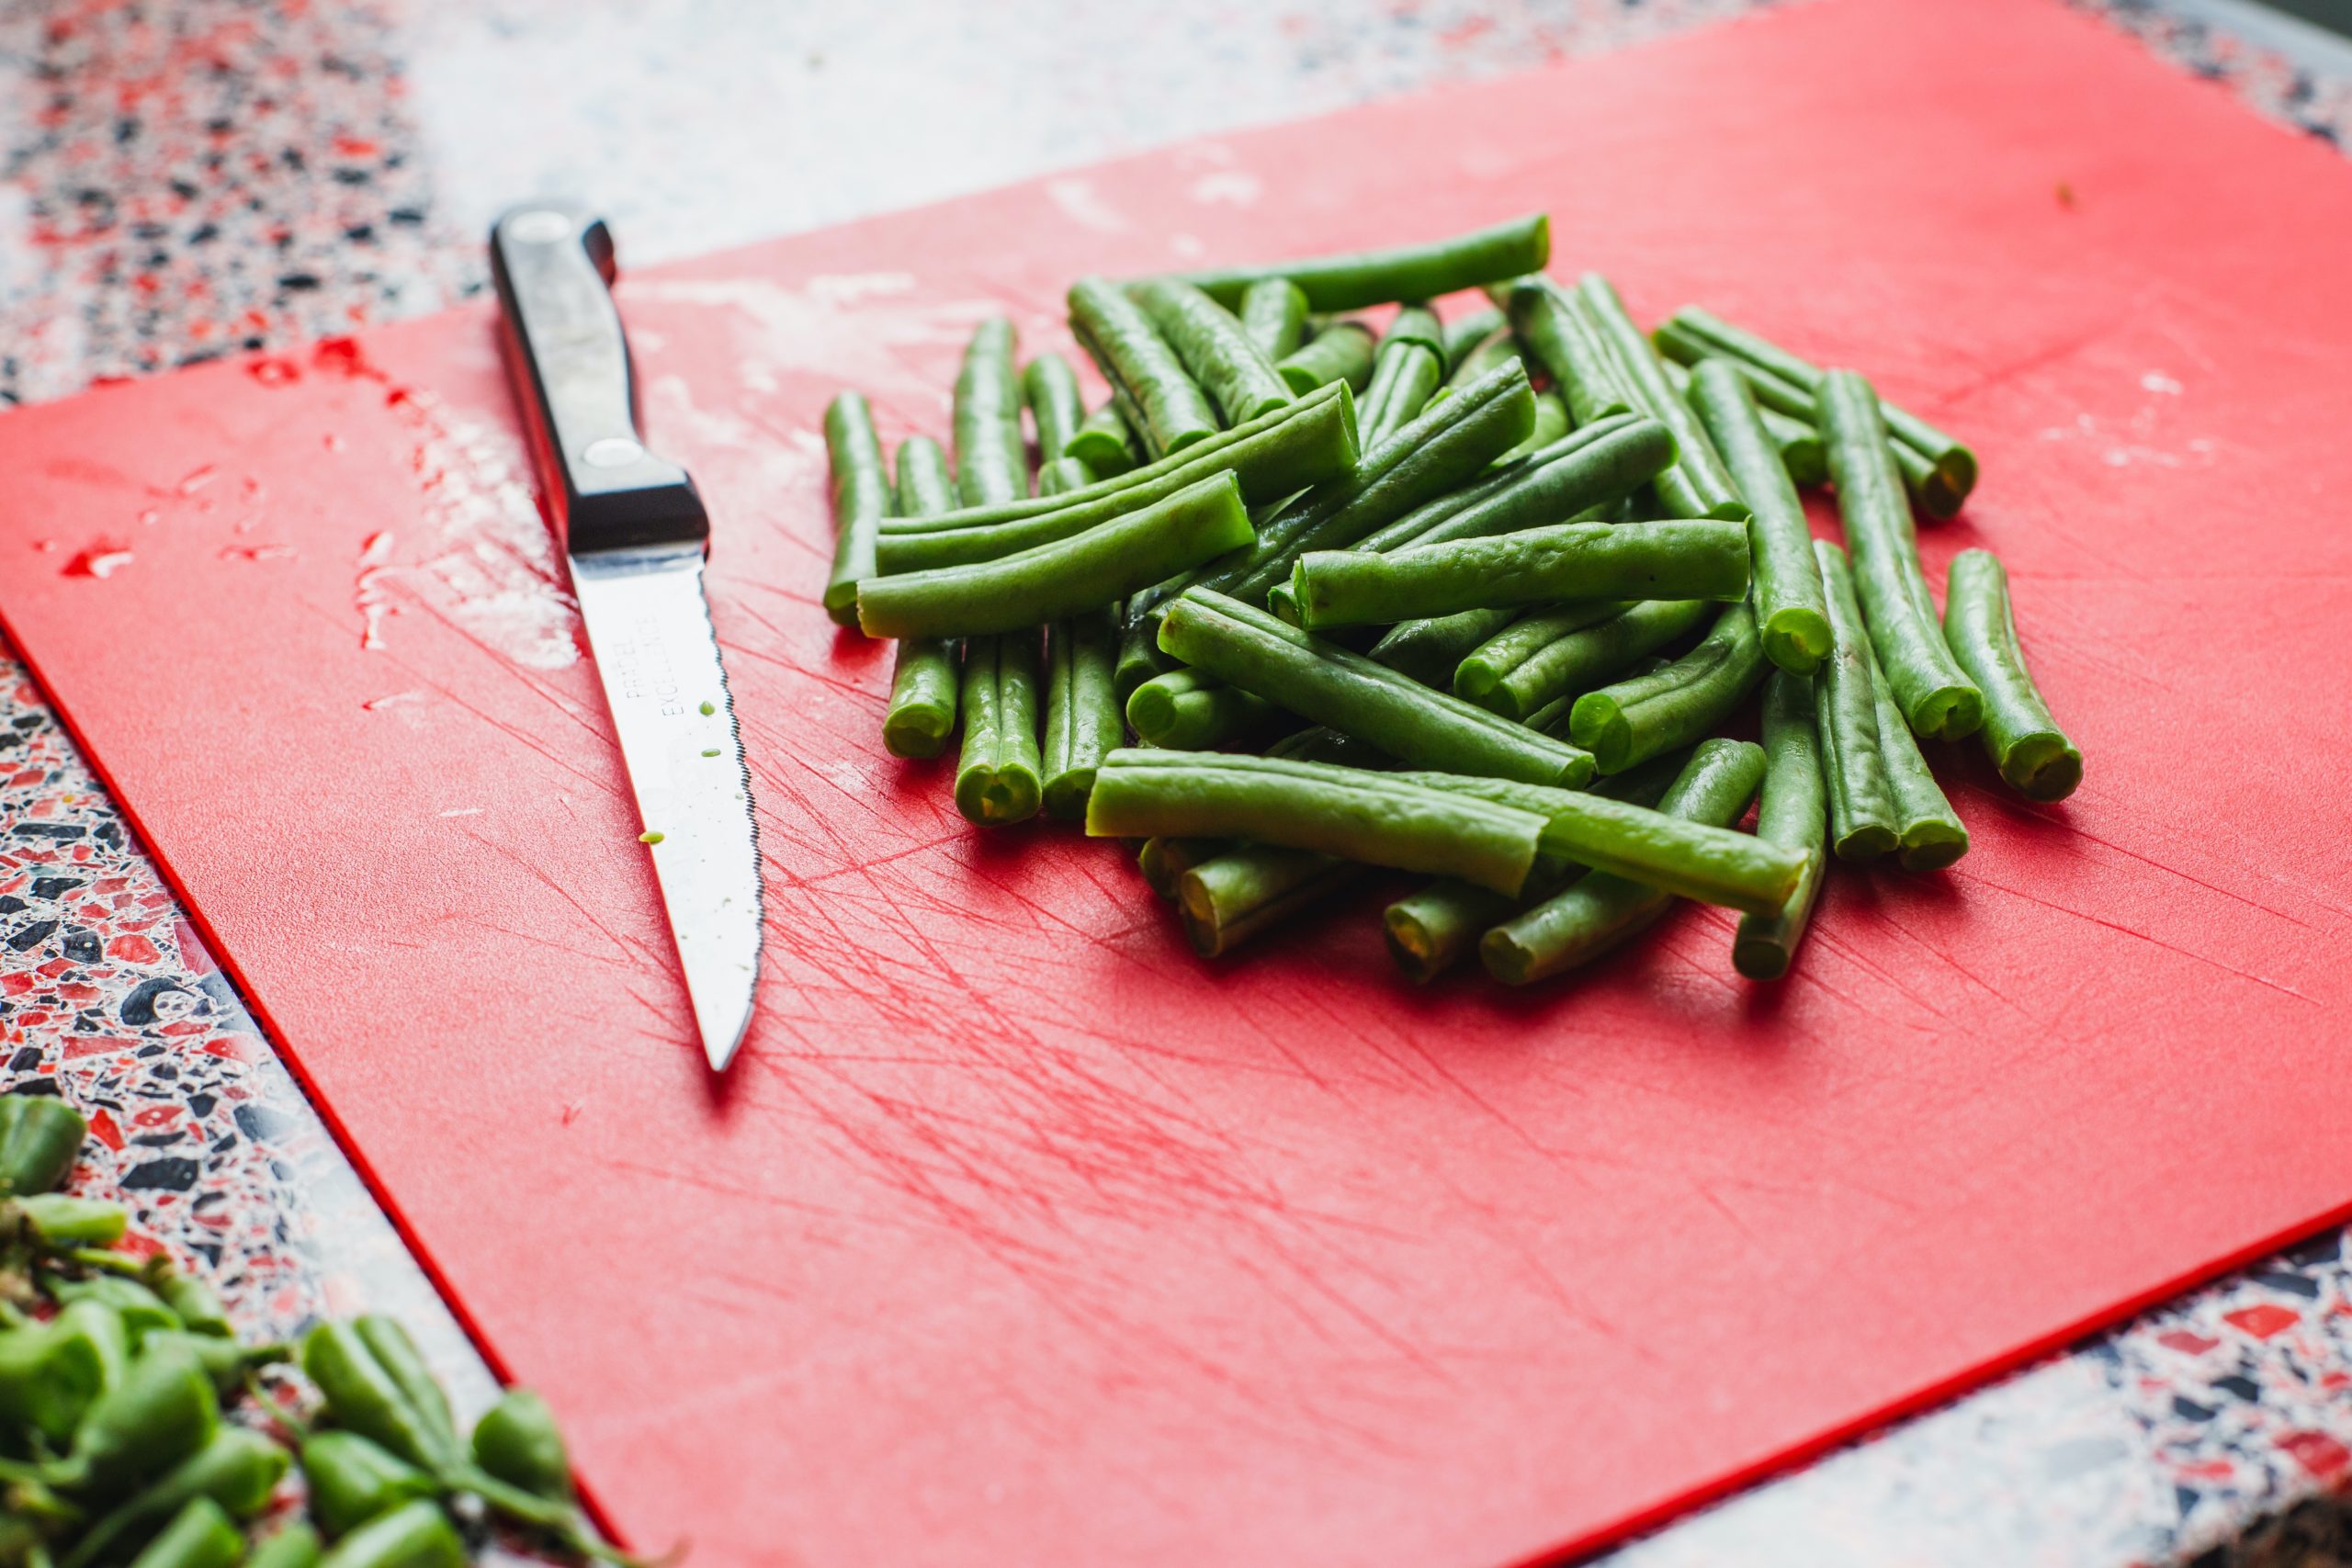 How To Tell If Green Beans Are Bad?